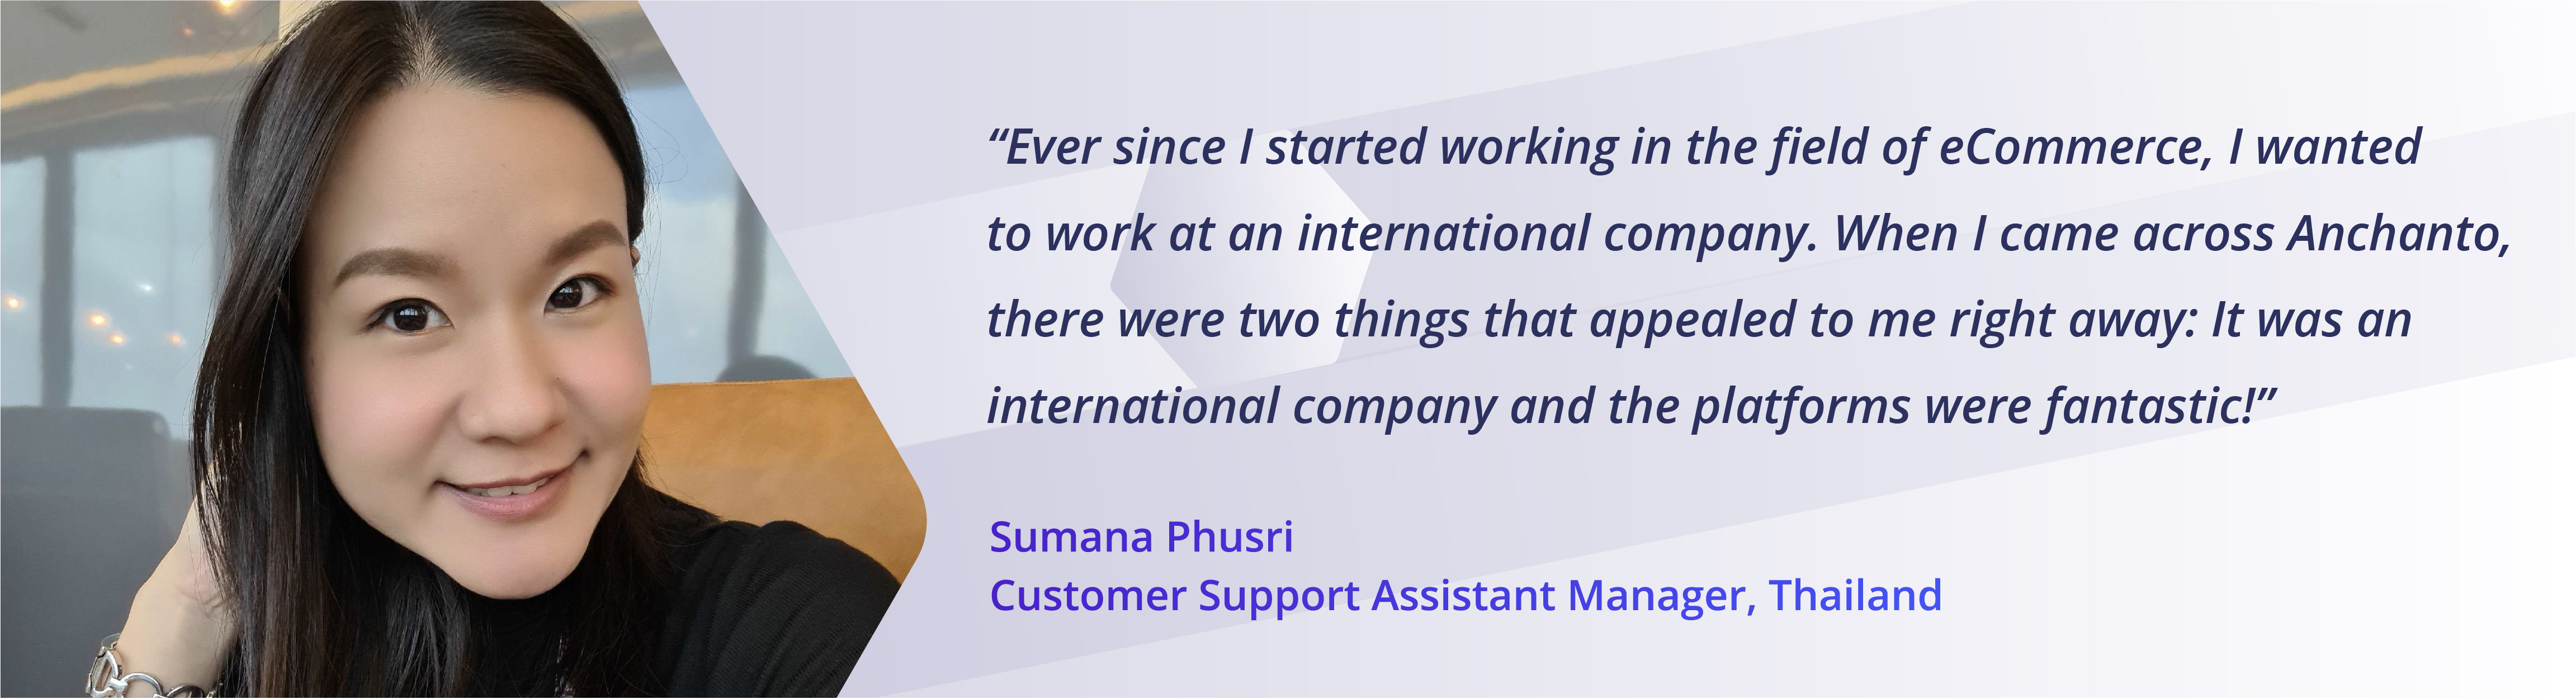 Sumana, Customer Support Manager, Thailand